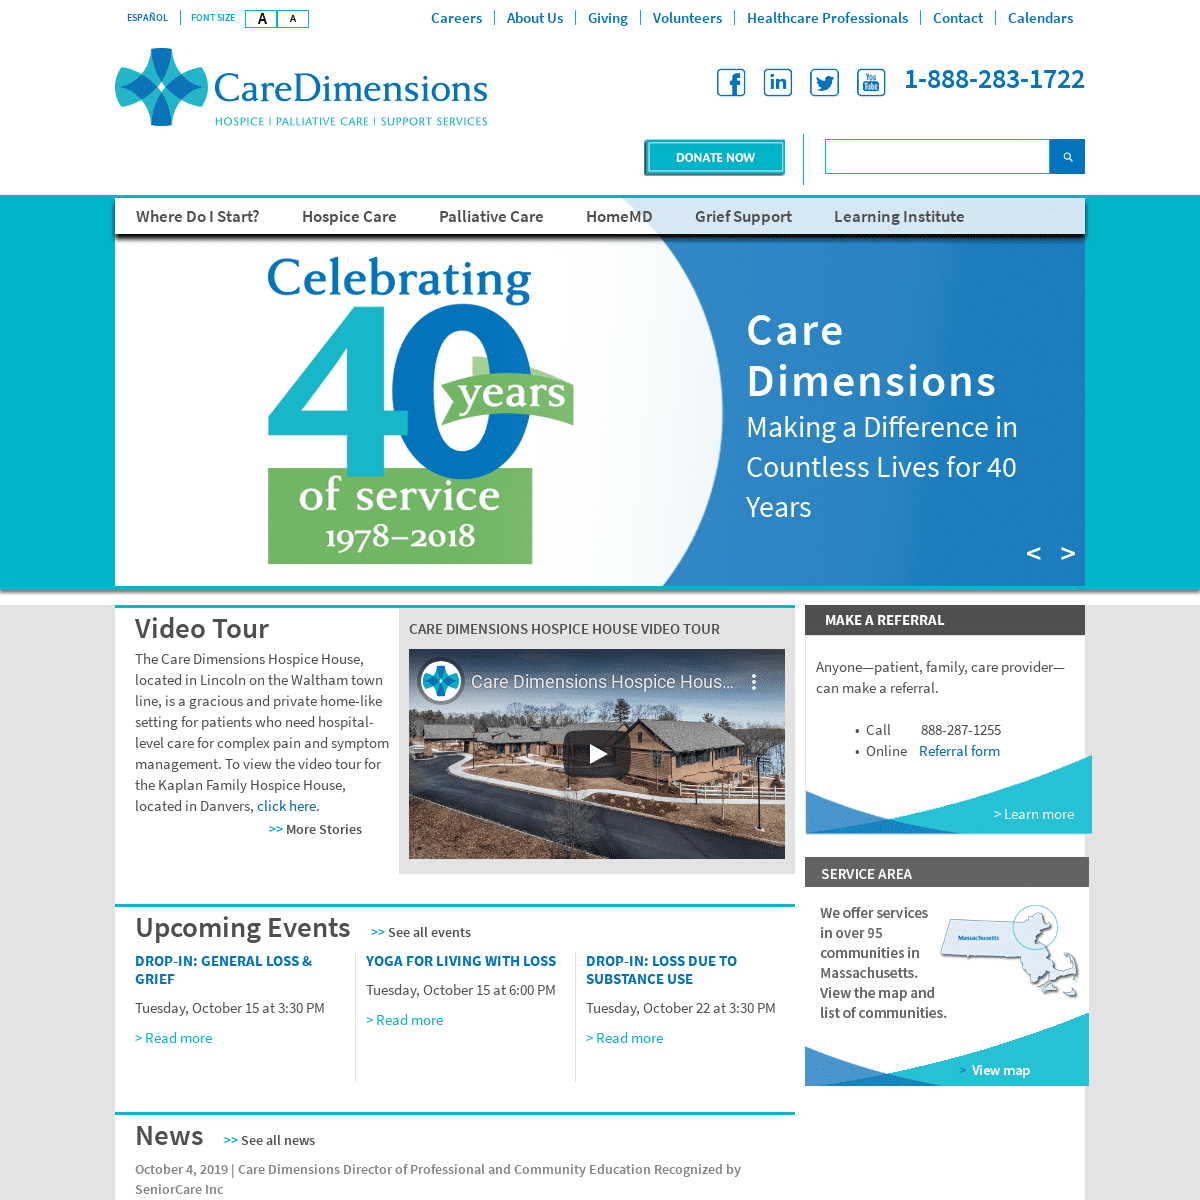 A complete backup of caredimensions.org